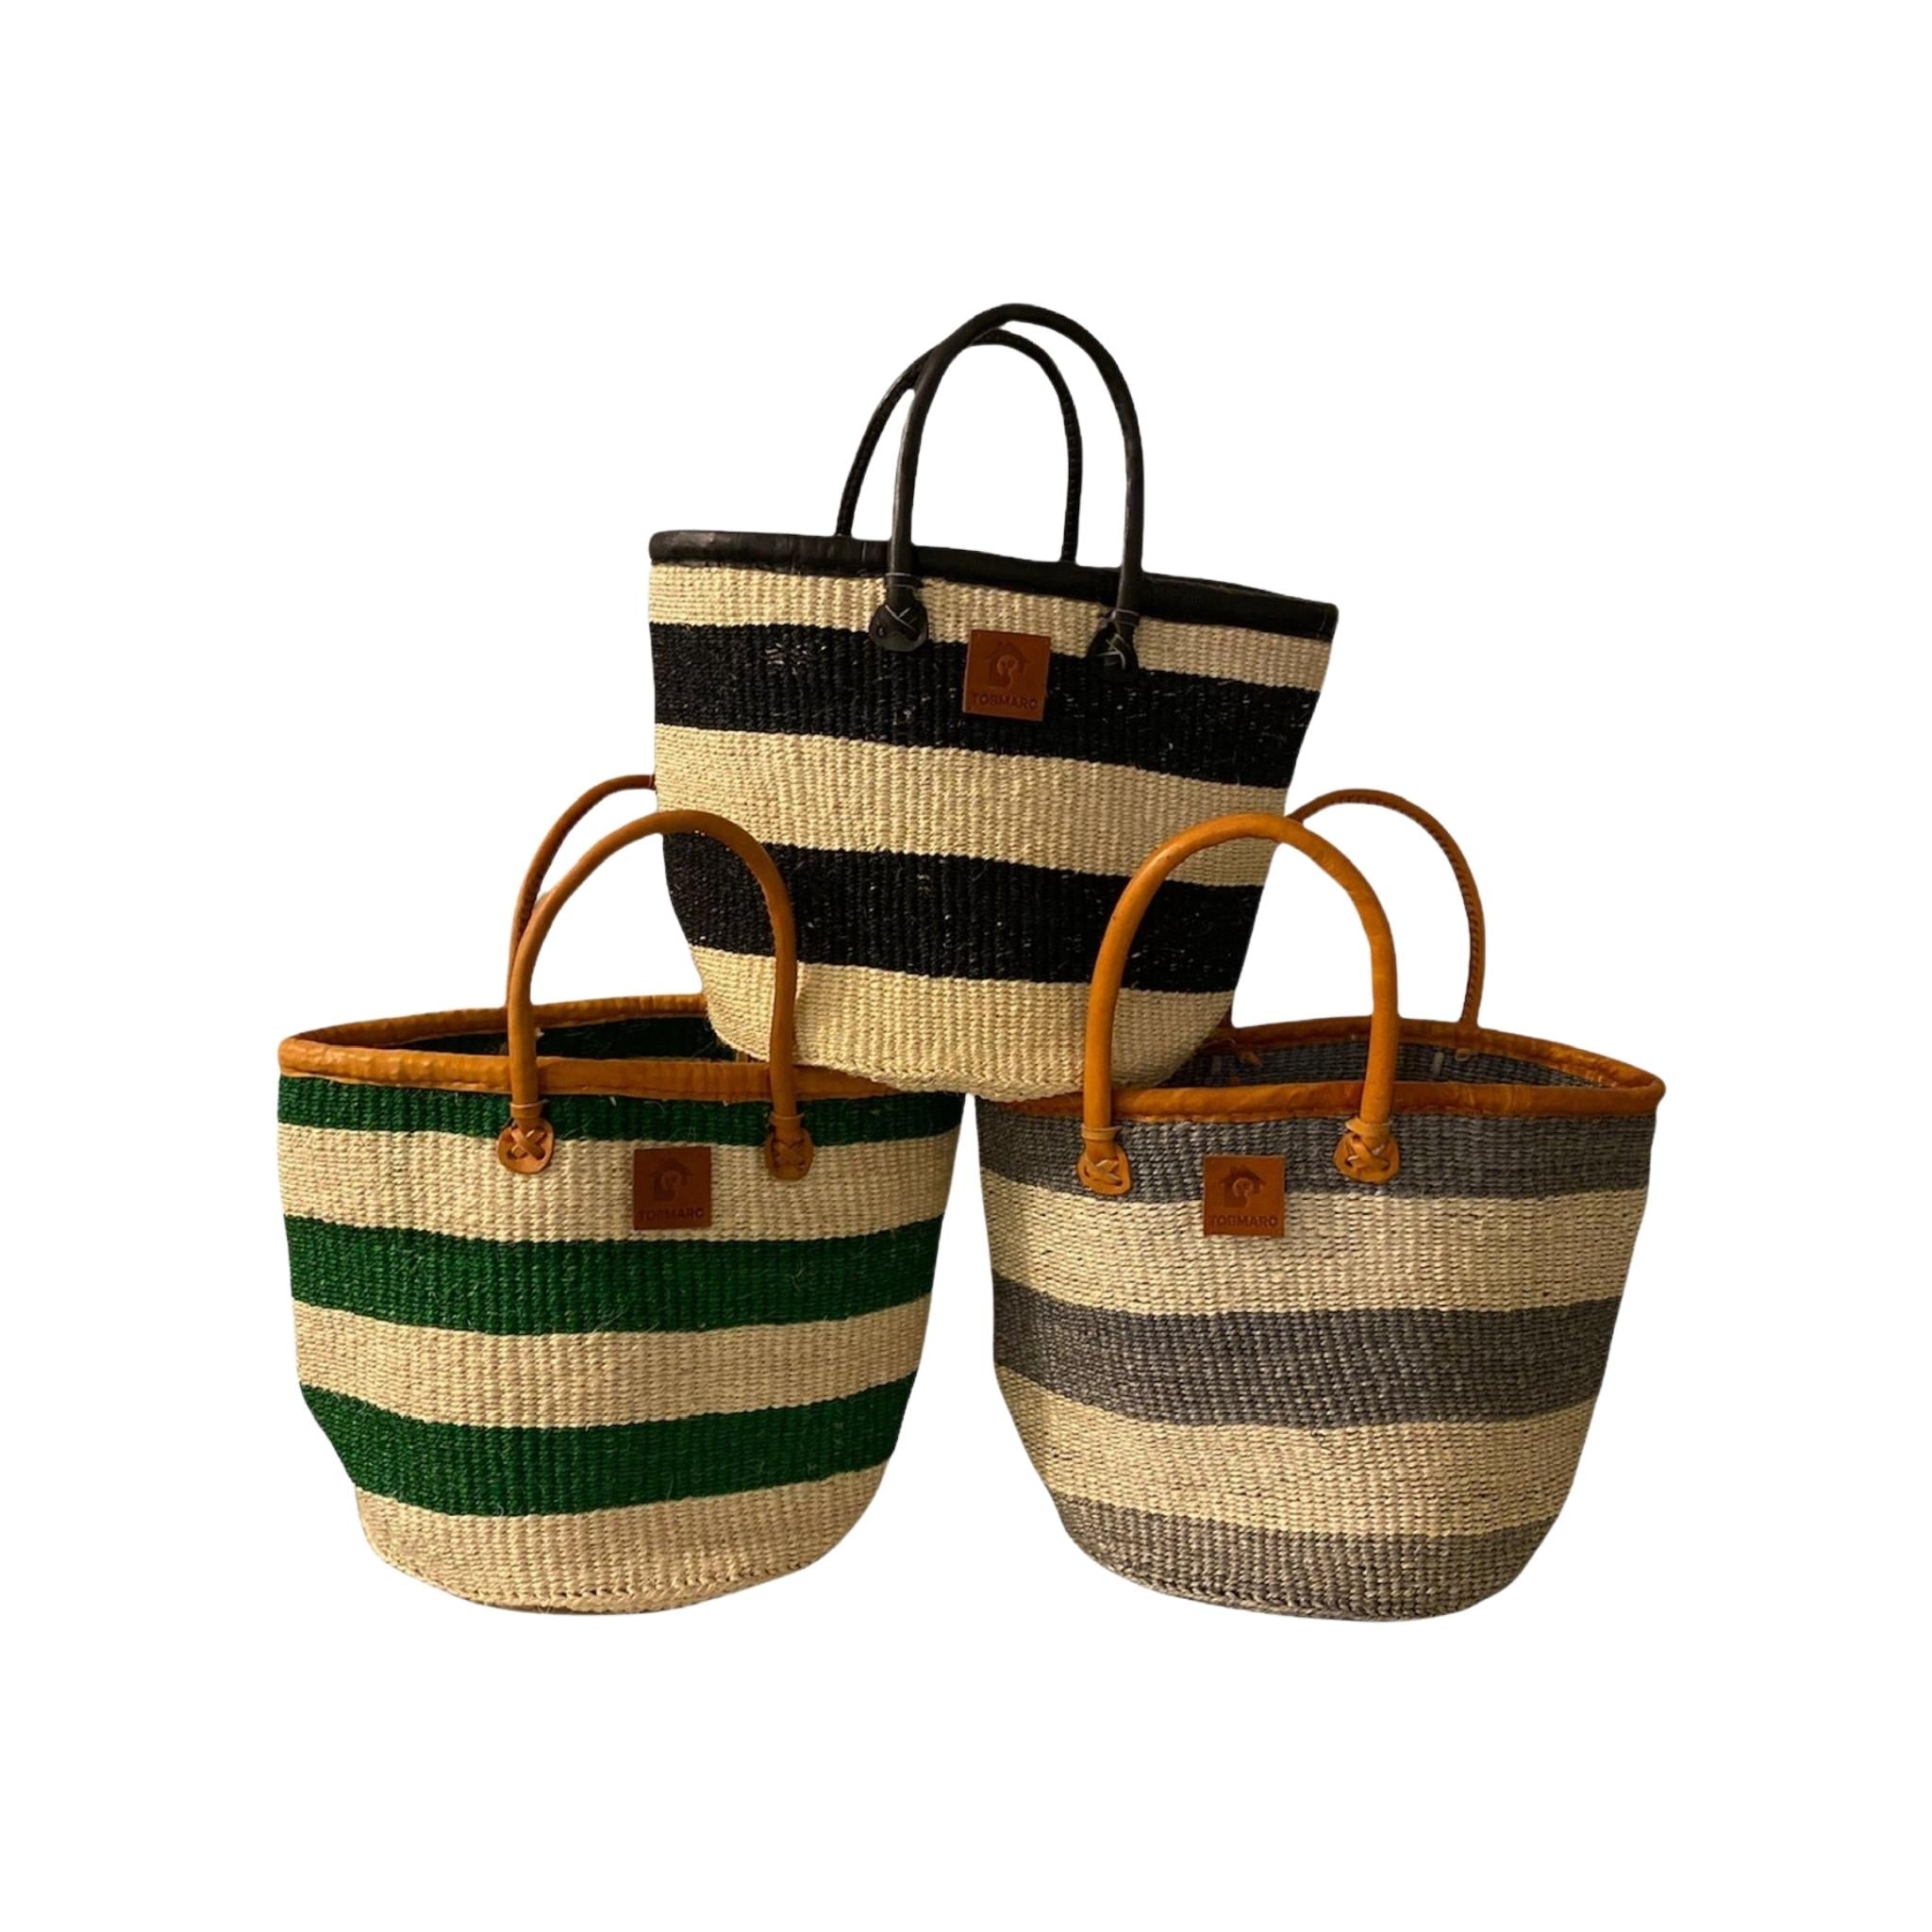 AFRICAN SHOPPING KIONDO  Two-Tone Handwoven Basket with handles for Storage Set  12” and 10” - Tobmarc Home Decor & Gifts 